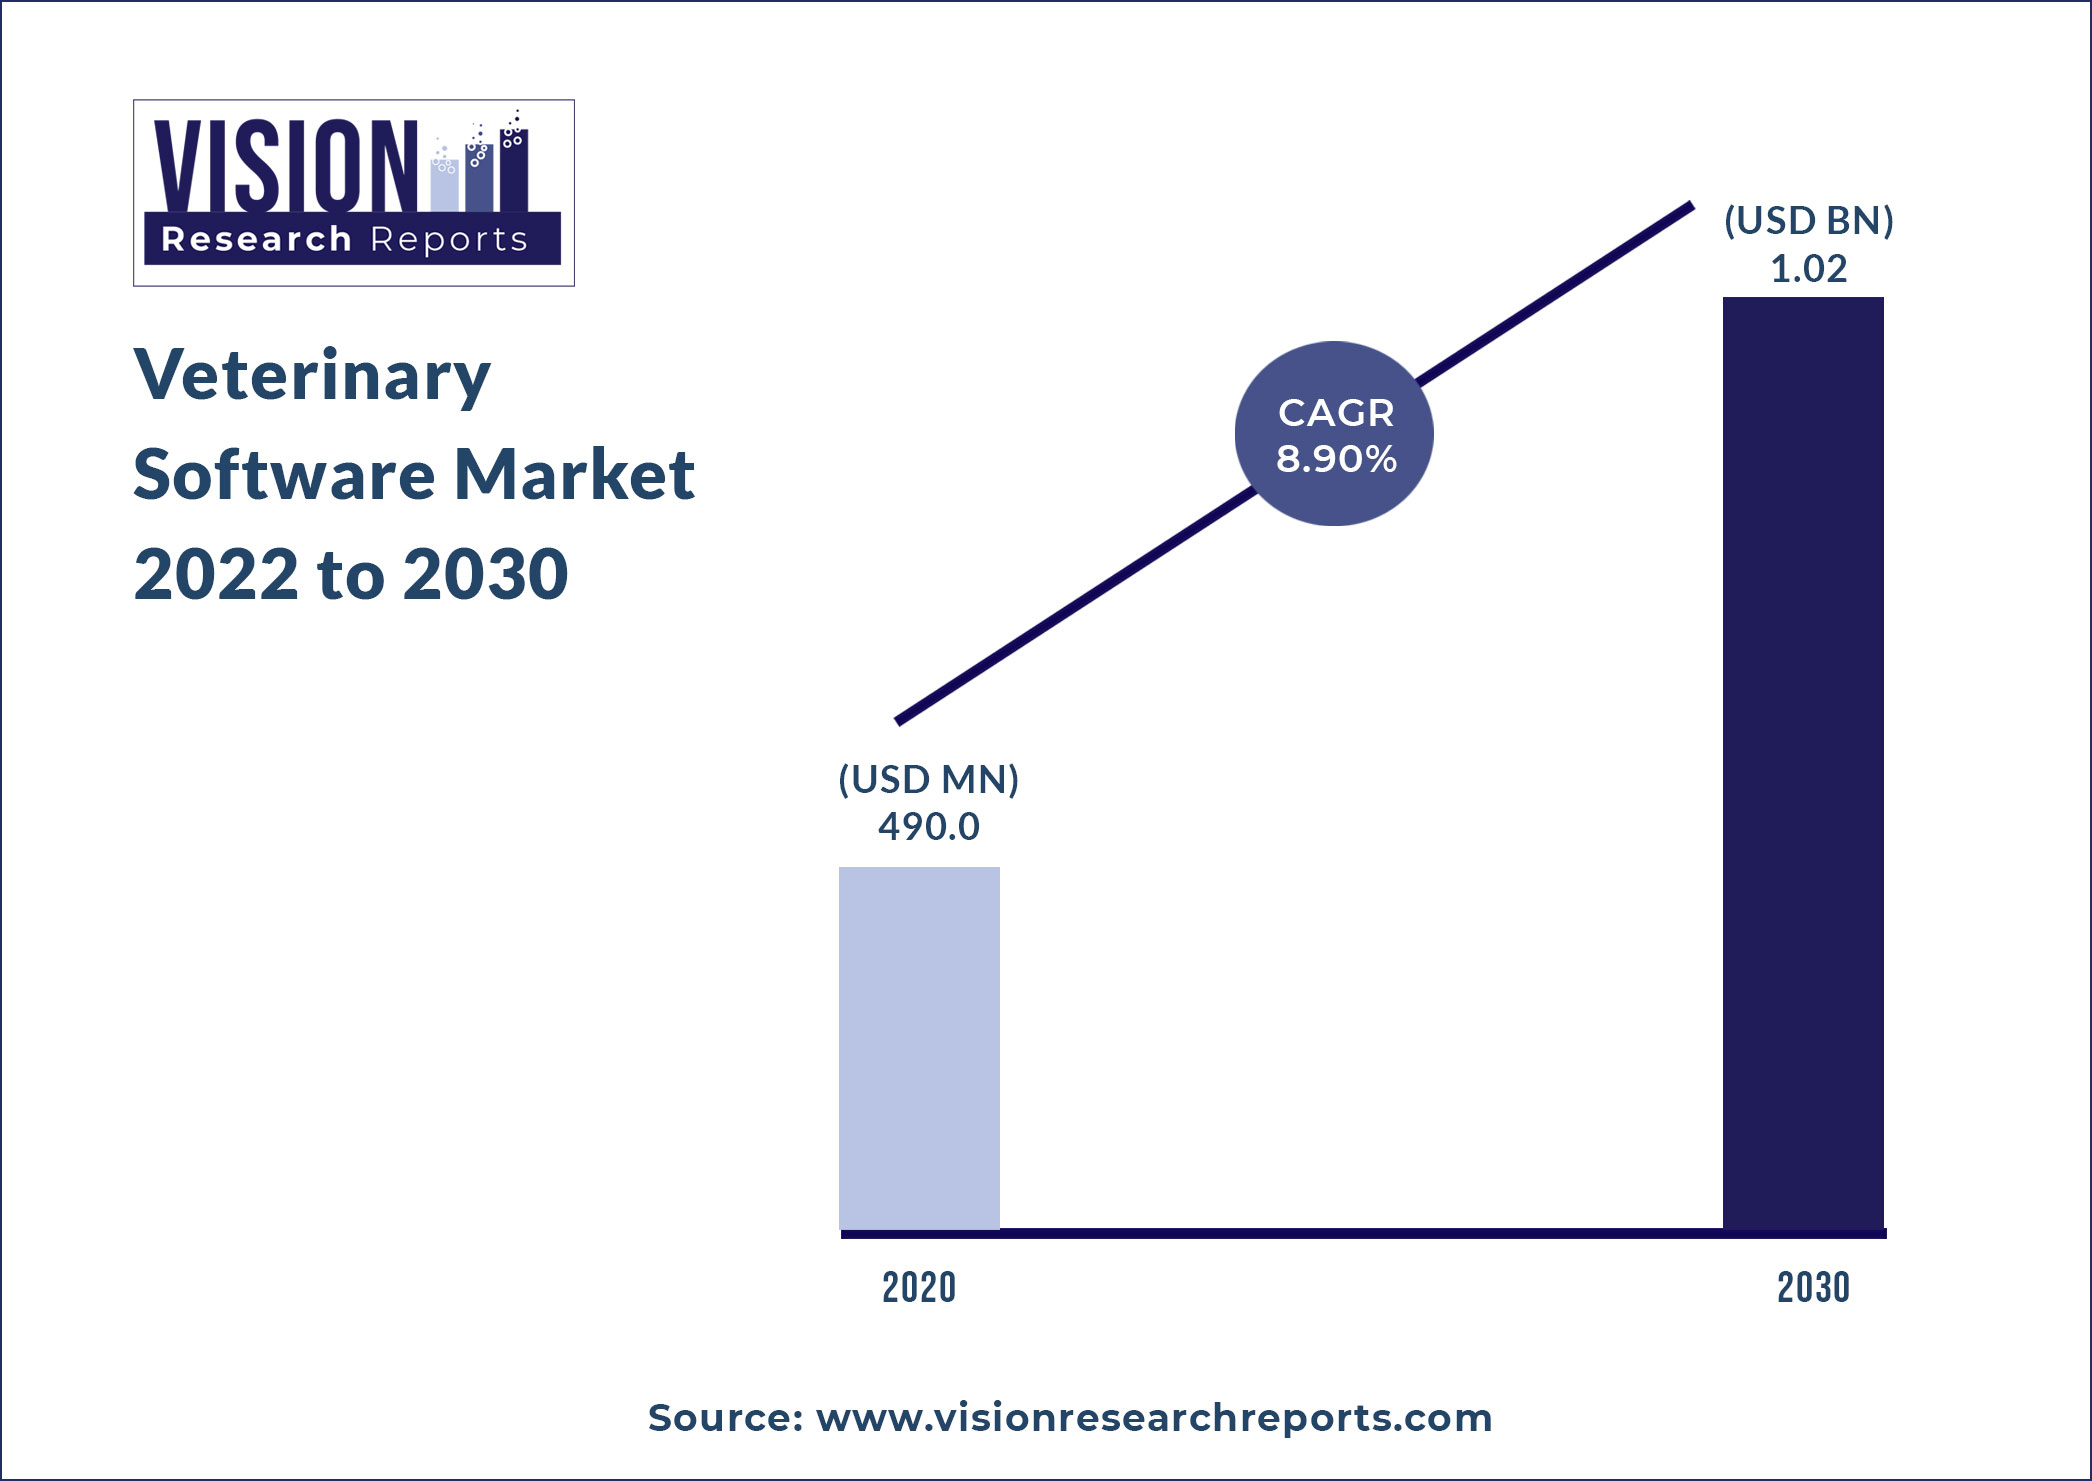 Veterinary Software Market Size 2022 to 2030